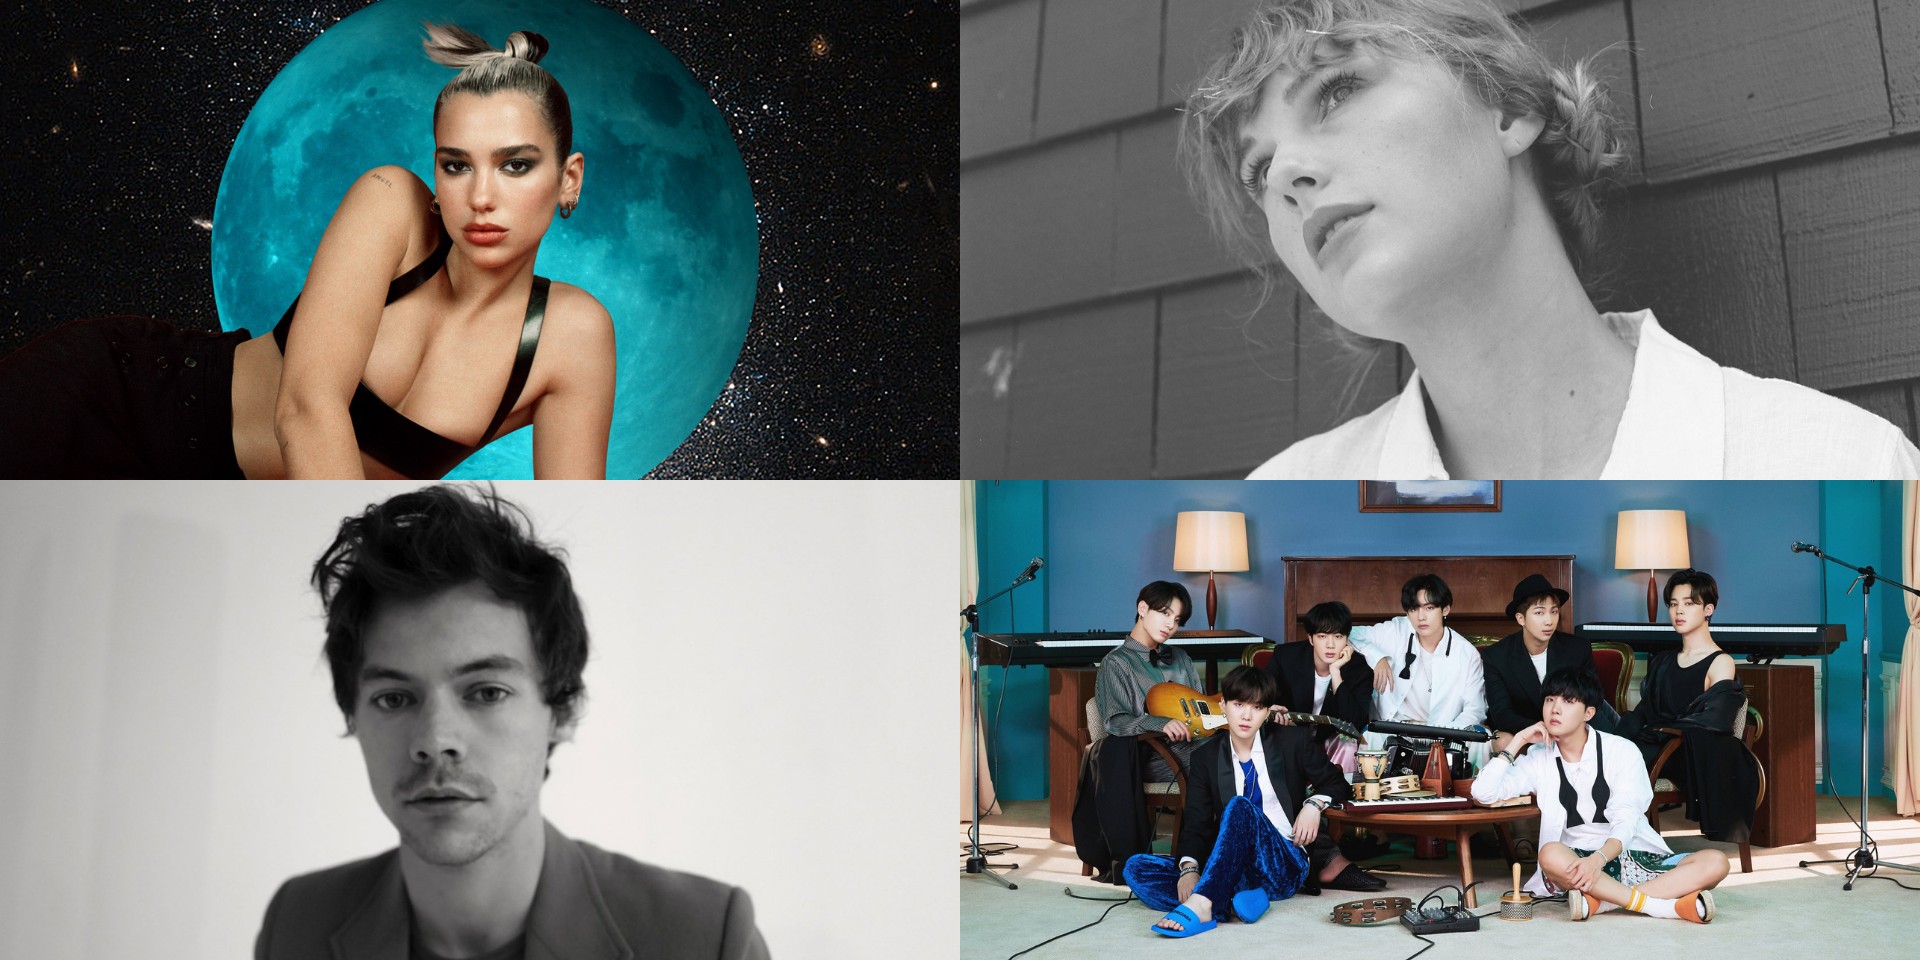 GRAMMY Awards announce 2021 performers – BTS, Dua Lipa, Harry Styles, Taylor Swift, and more